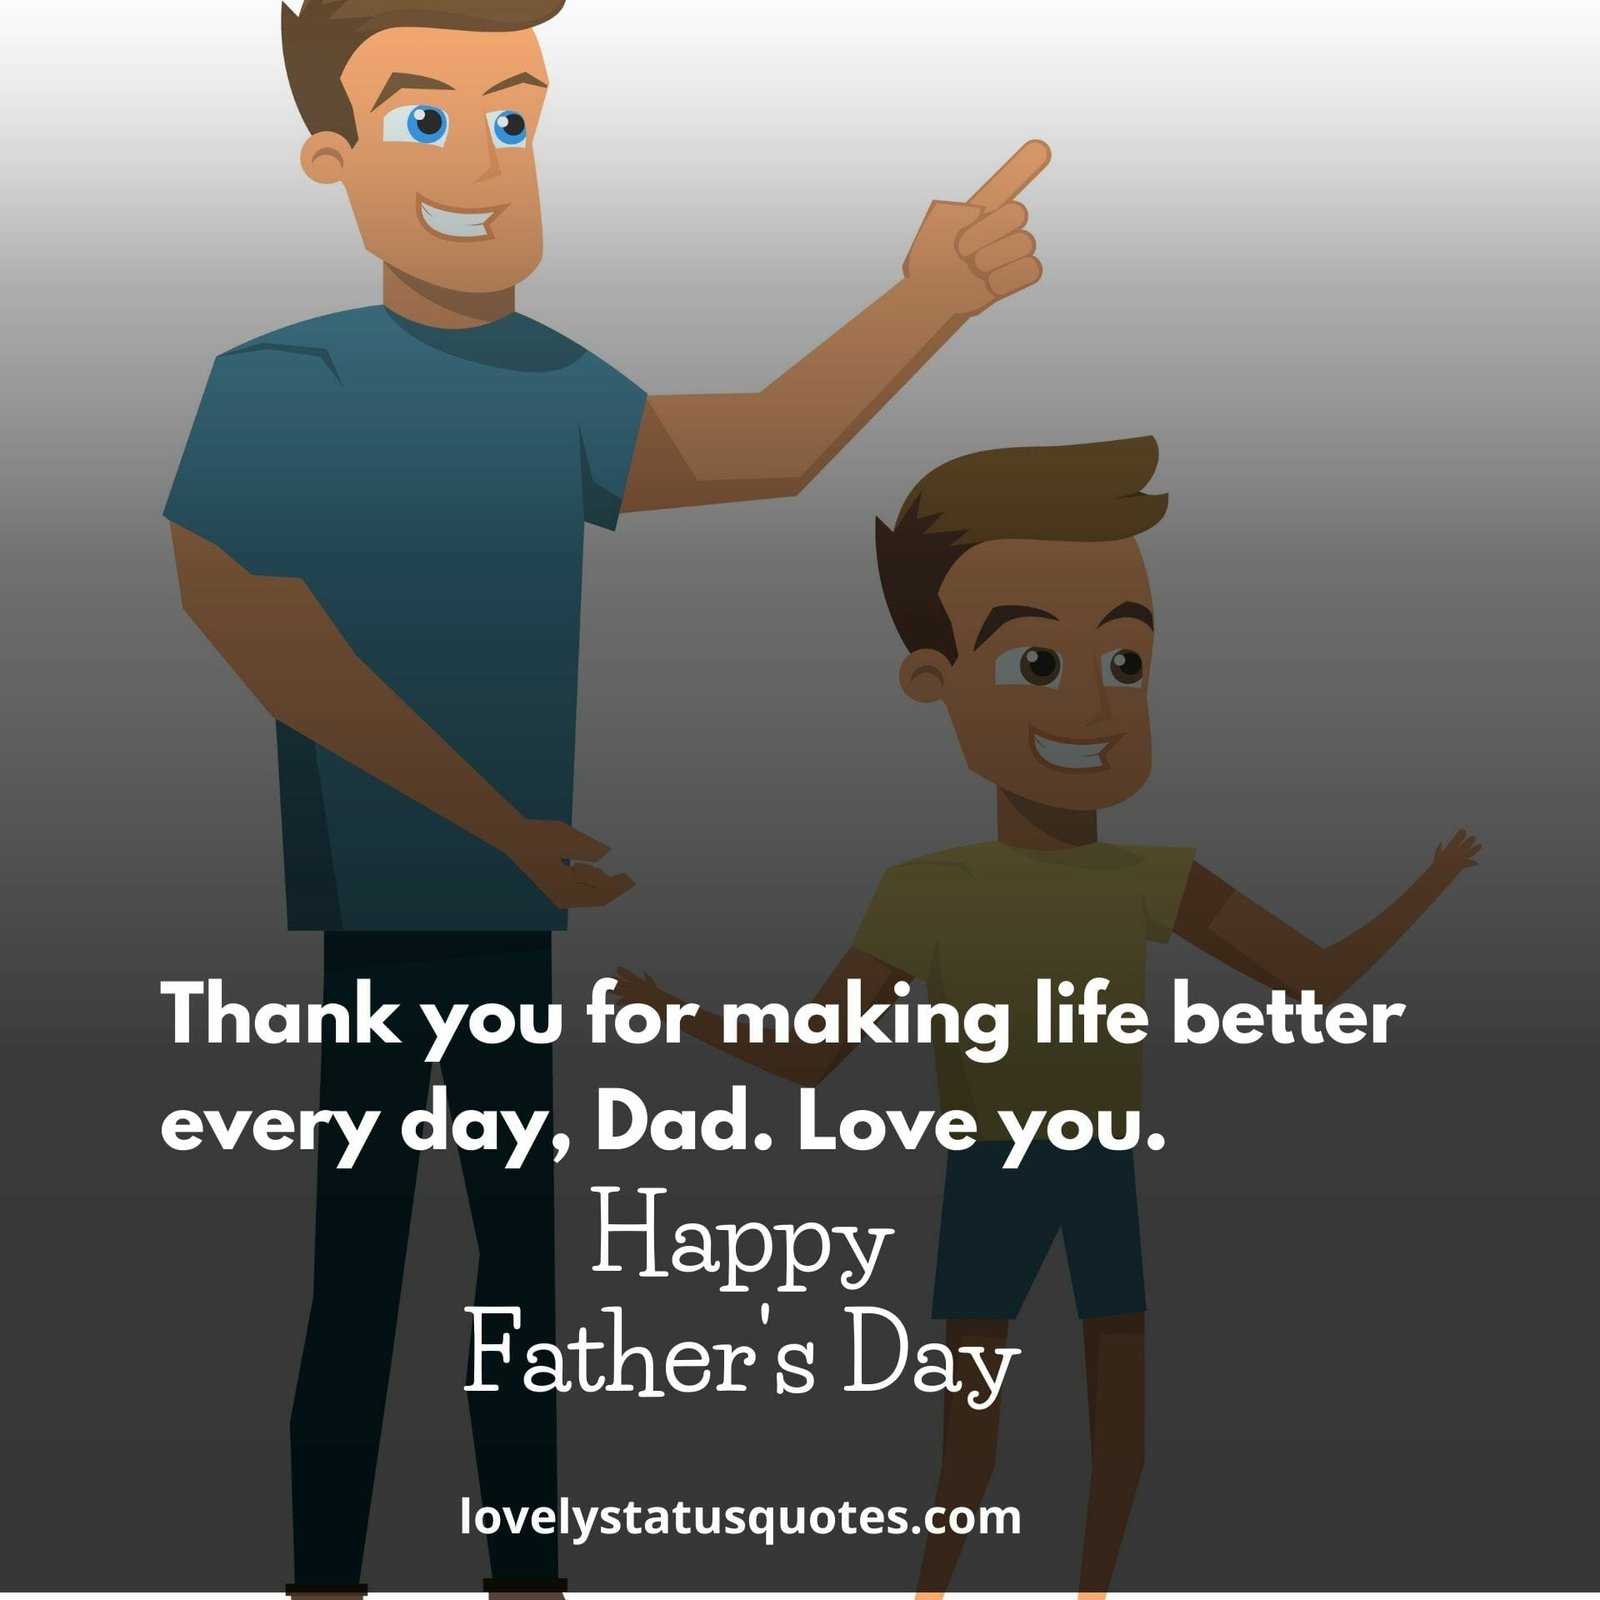 happy father's day Wishes photos free download